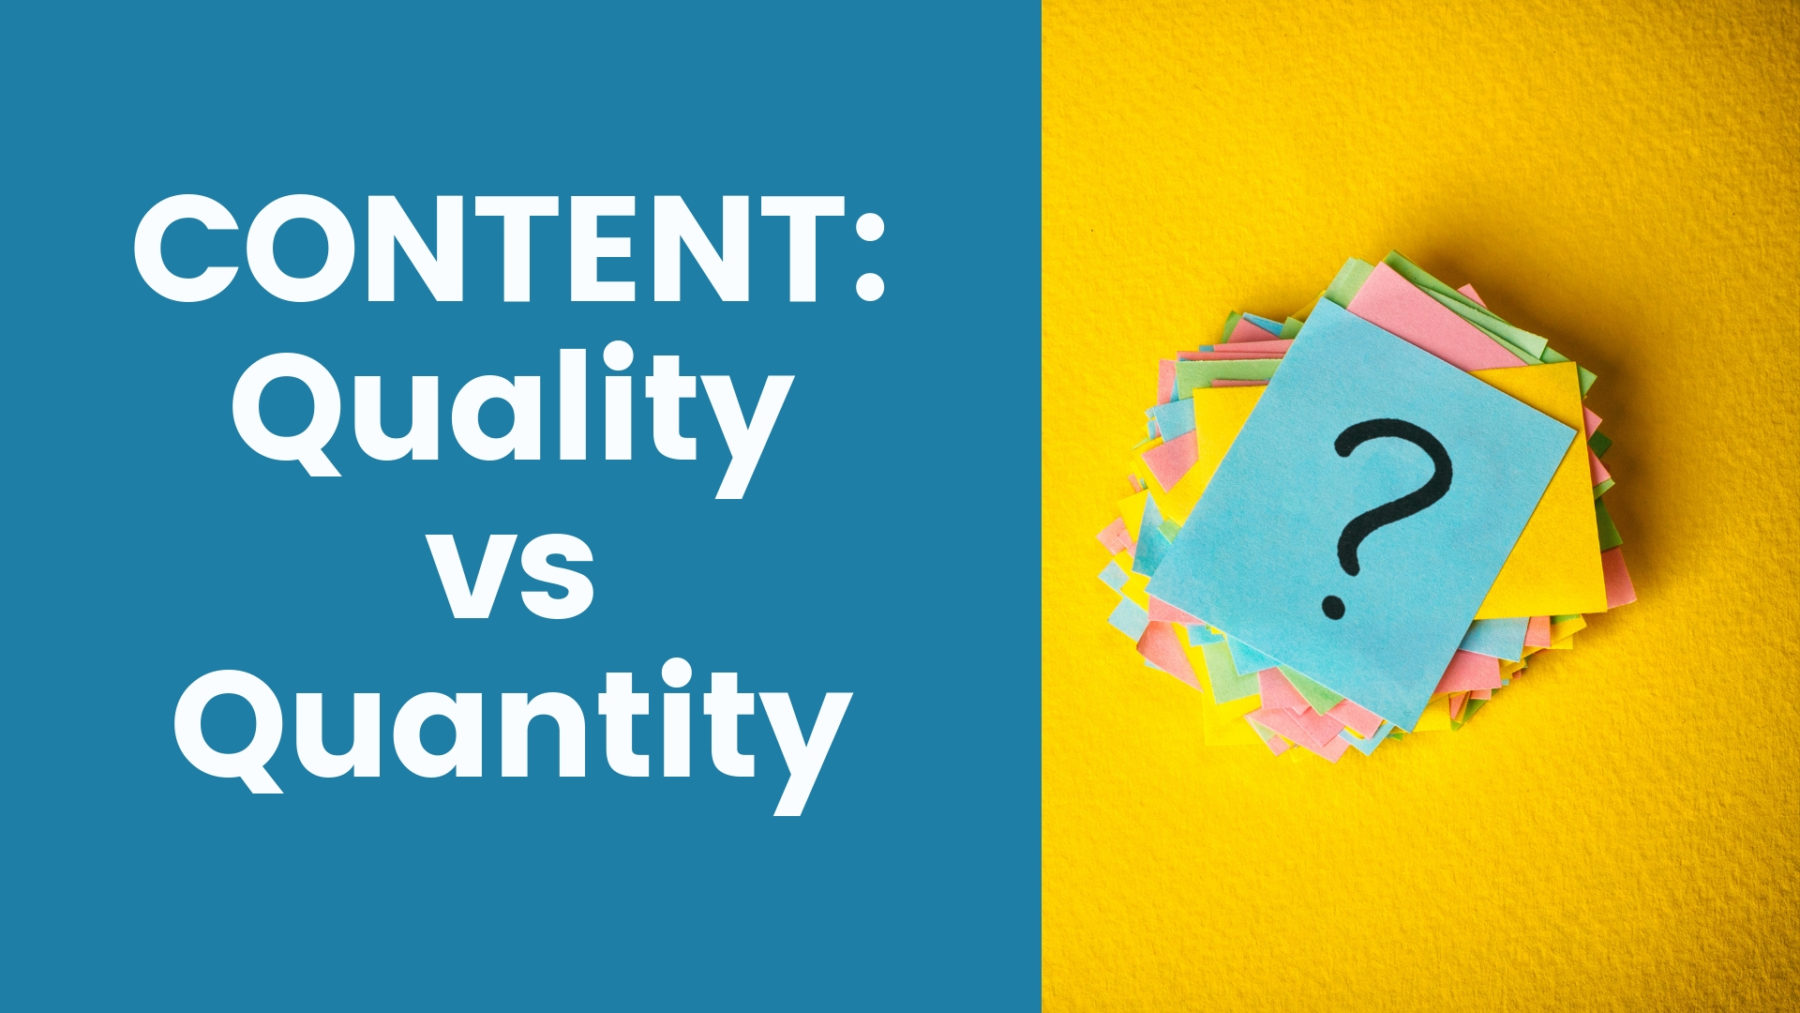 Content Quality vs. Content Quantity - Which is Better?